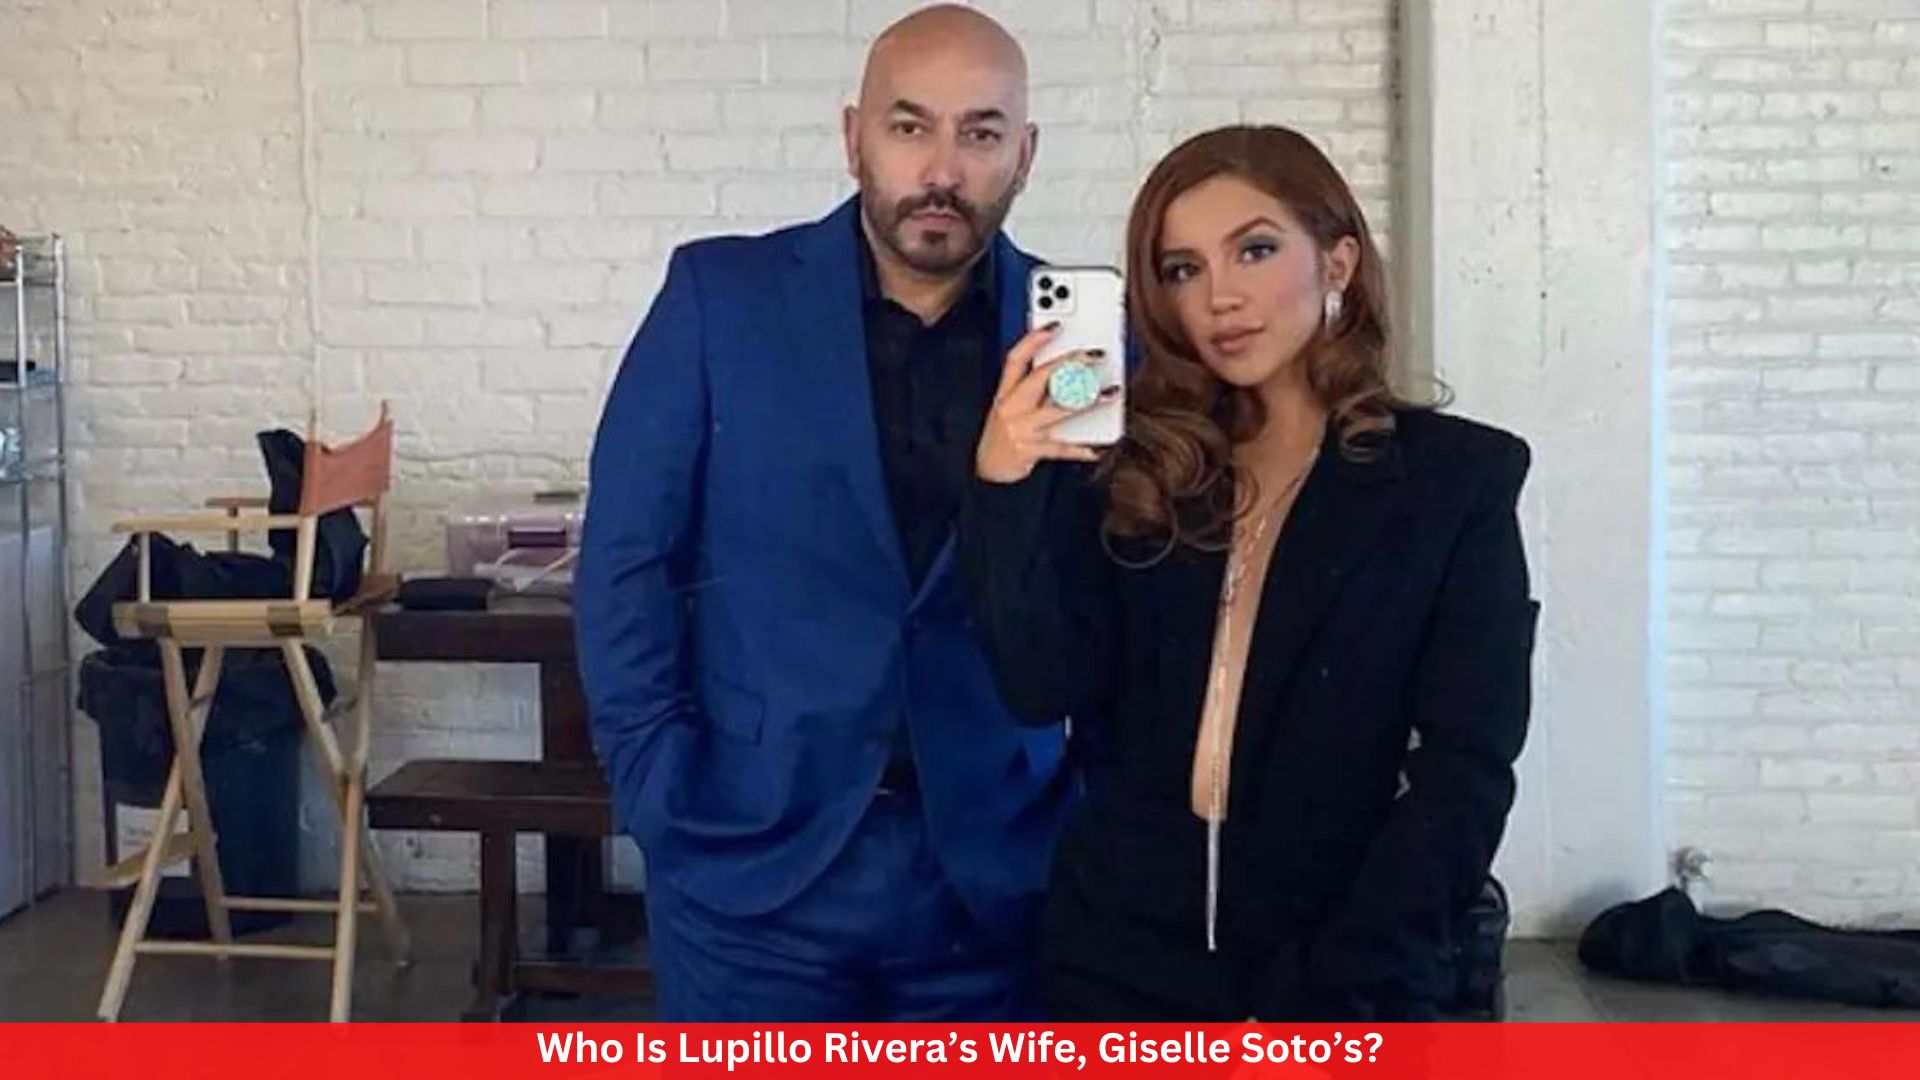 Who Is Lupillo Rivera’s Wife, Giselle Soto’s?